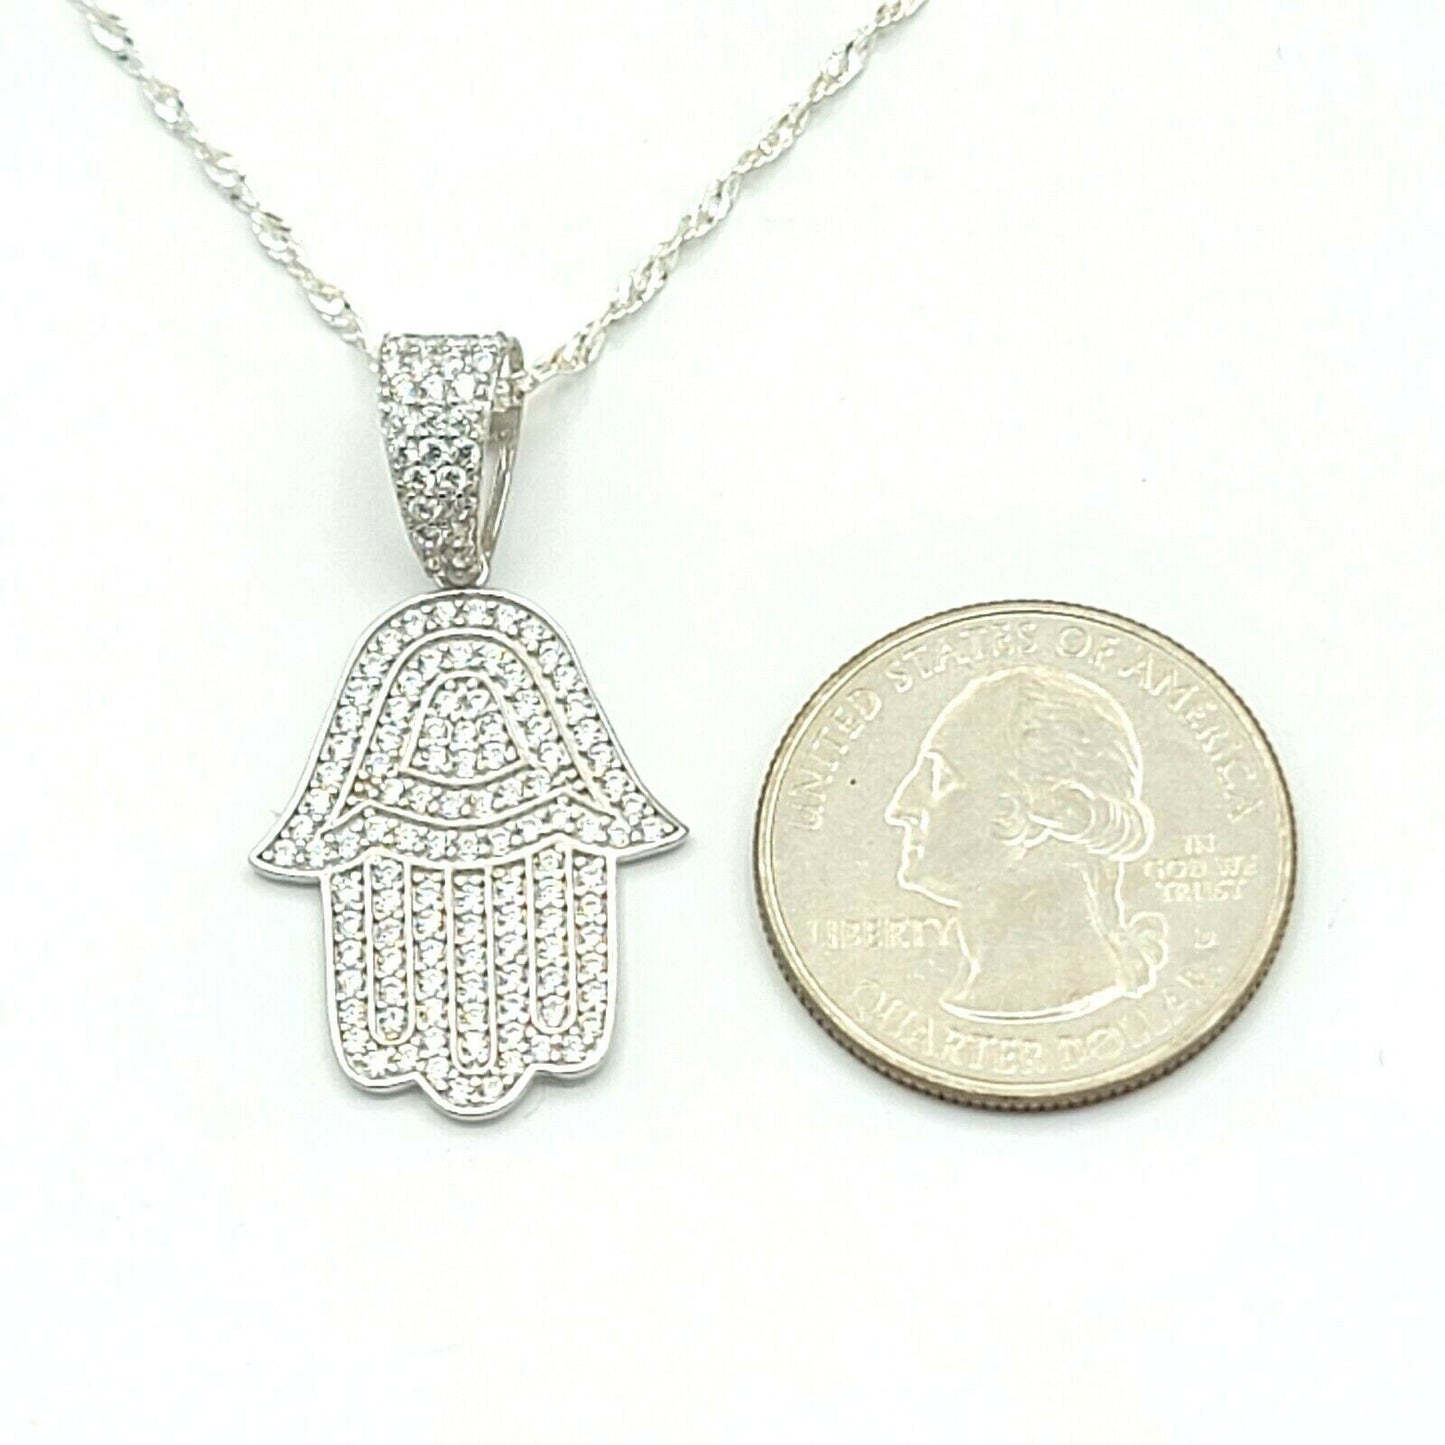 Solid 925 Sterling Silver. Hamsa Hand Iced Pendant Necklace.